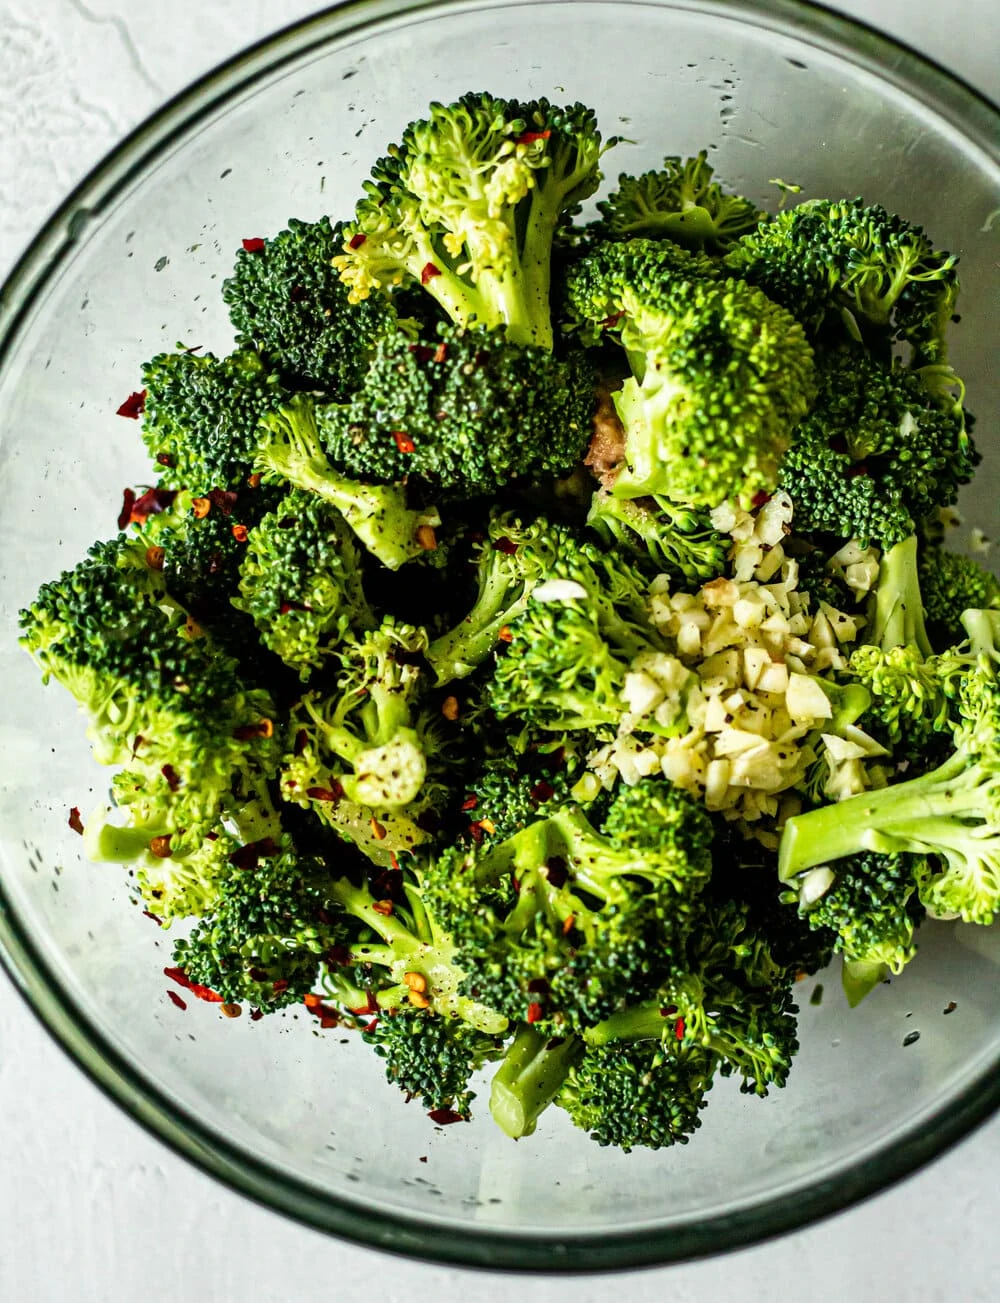 fresh broccoli in a glass mixing bowl